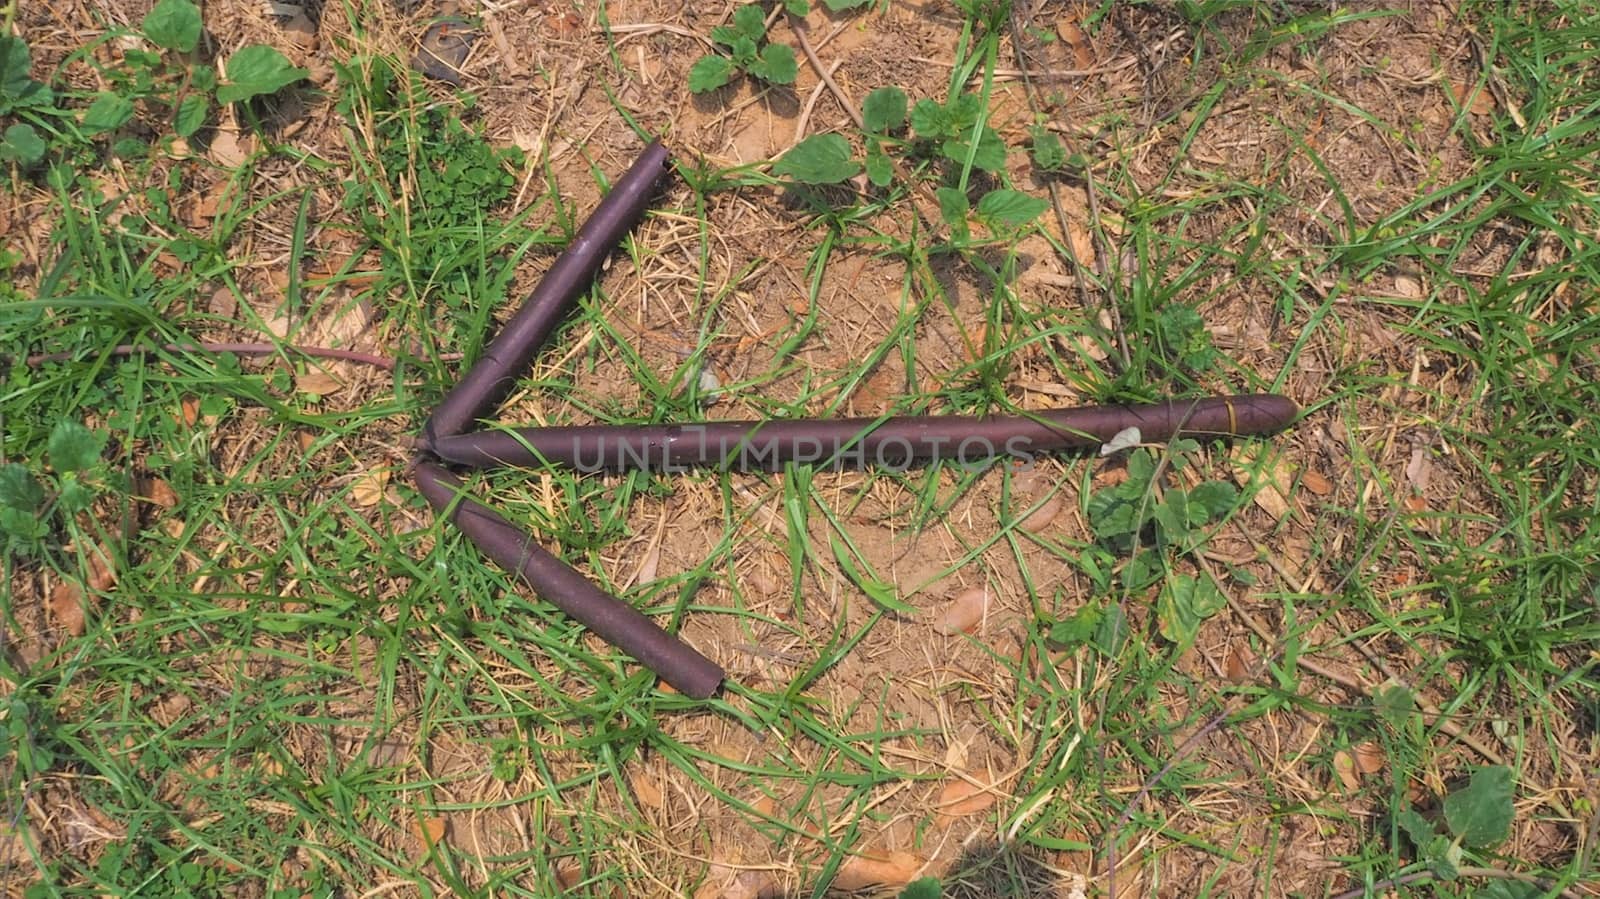 bush craft bushcraft stick arrow pointing left on grass and brown wooden sticks survival military sign signal